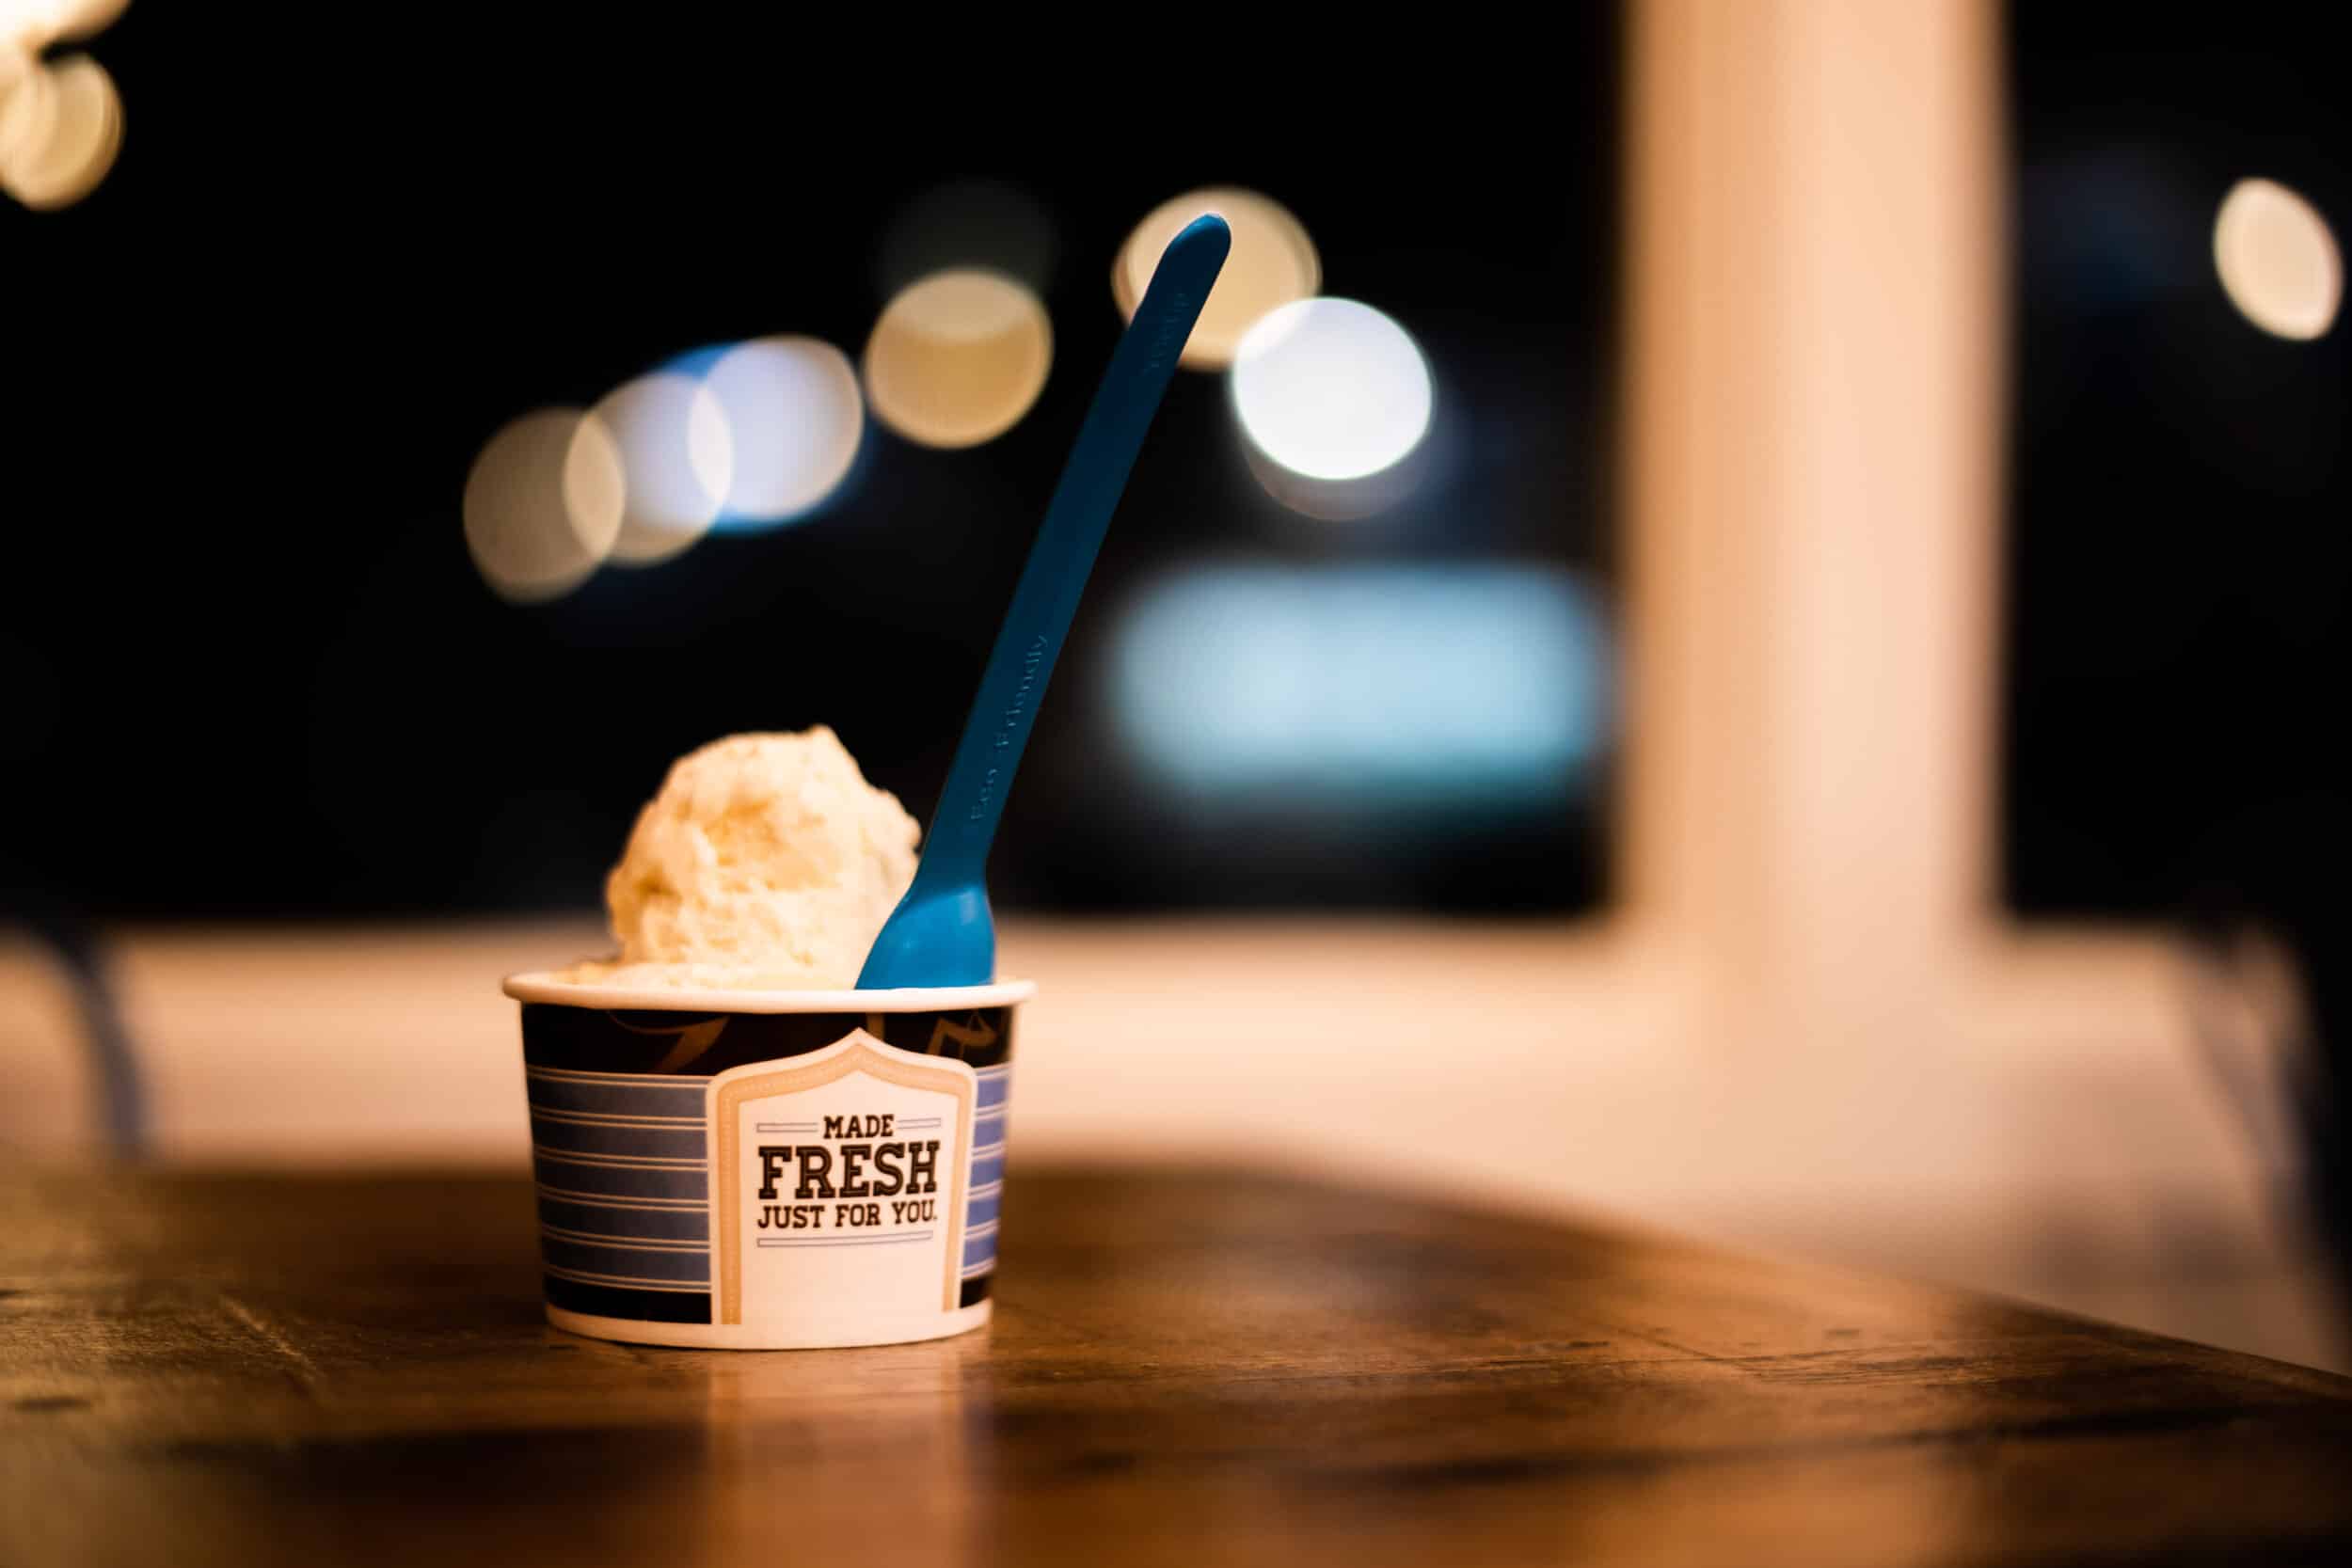 What is the difference between frozen custard and ice cream? Well, heres a fun fact: frozen custard contains egg yolk that makes the texture extra smooth and creamy.